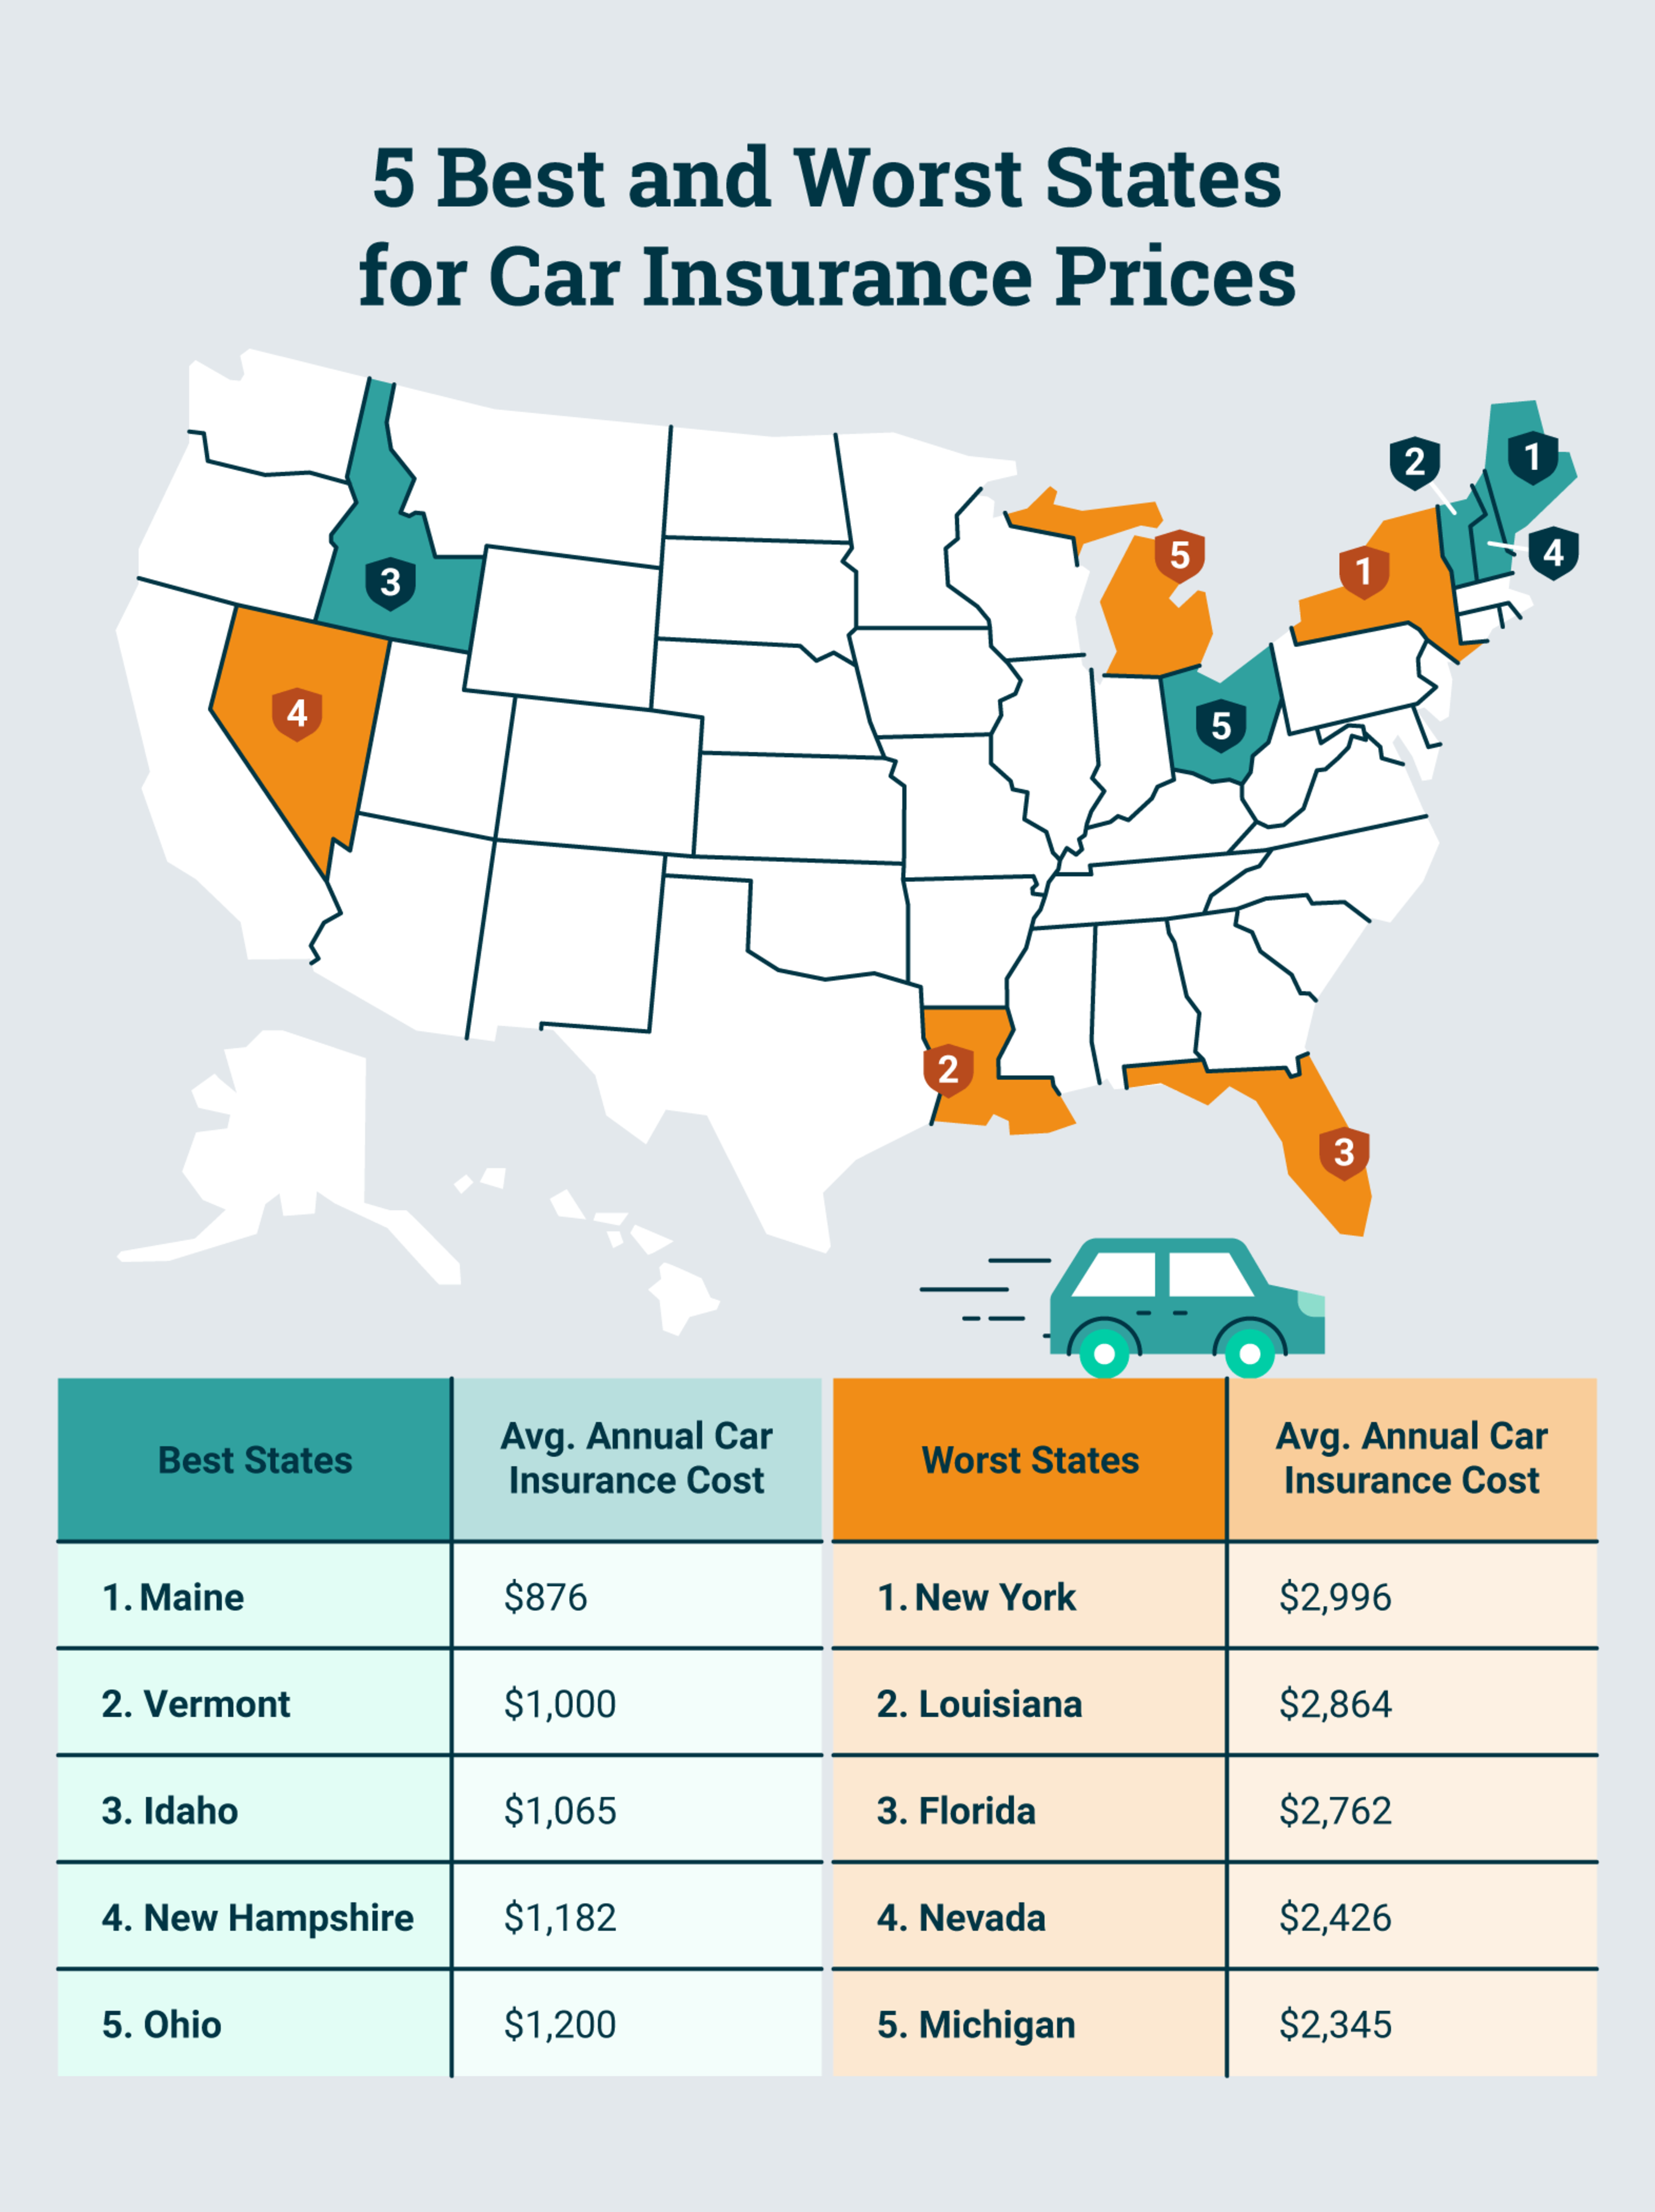 The best and worst states for car insurance prices